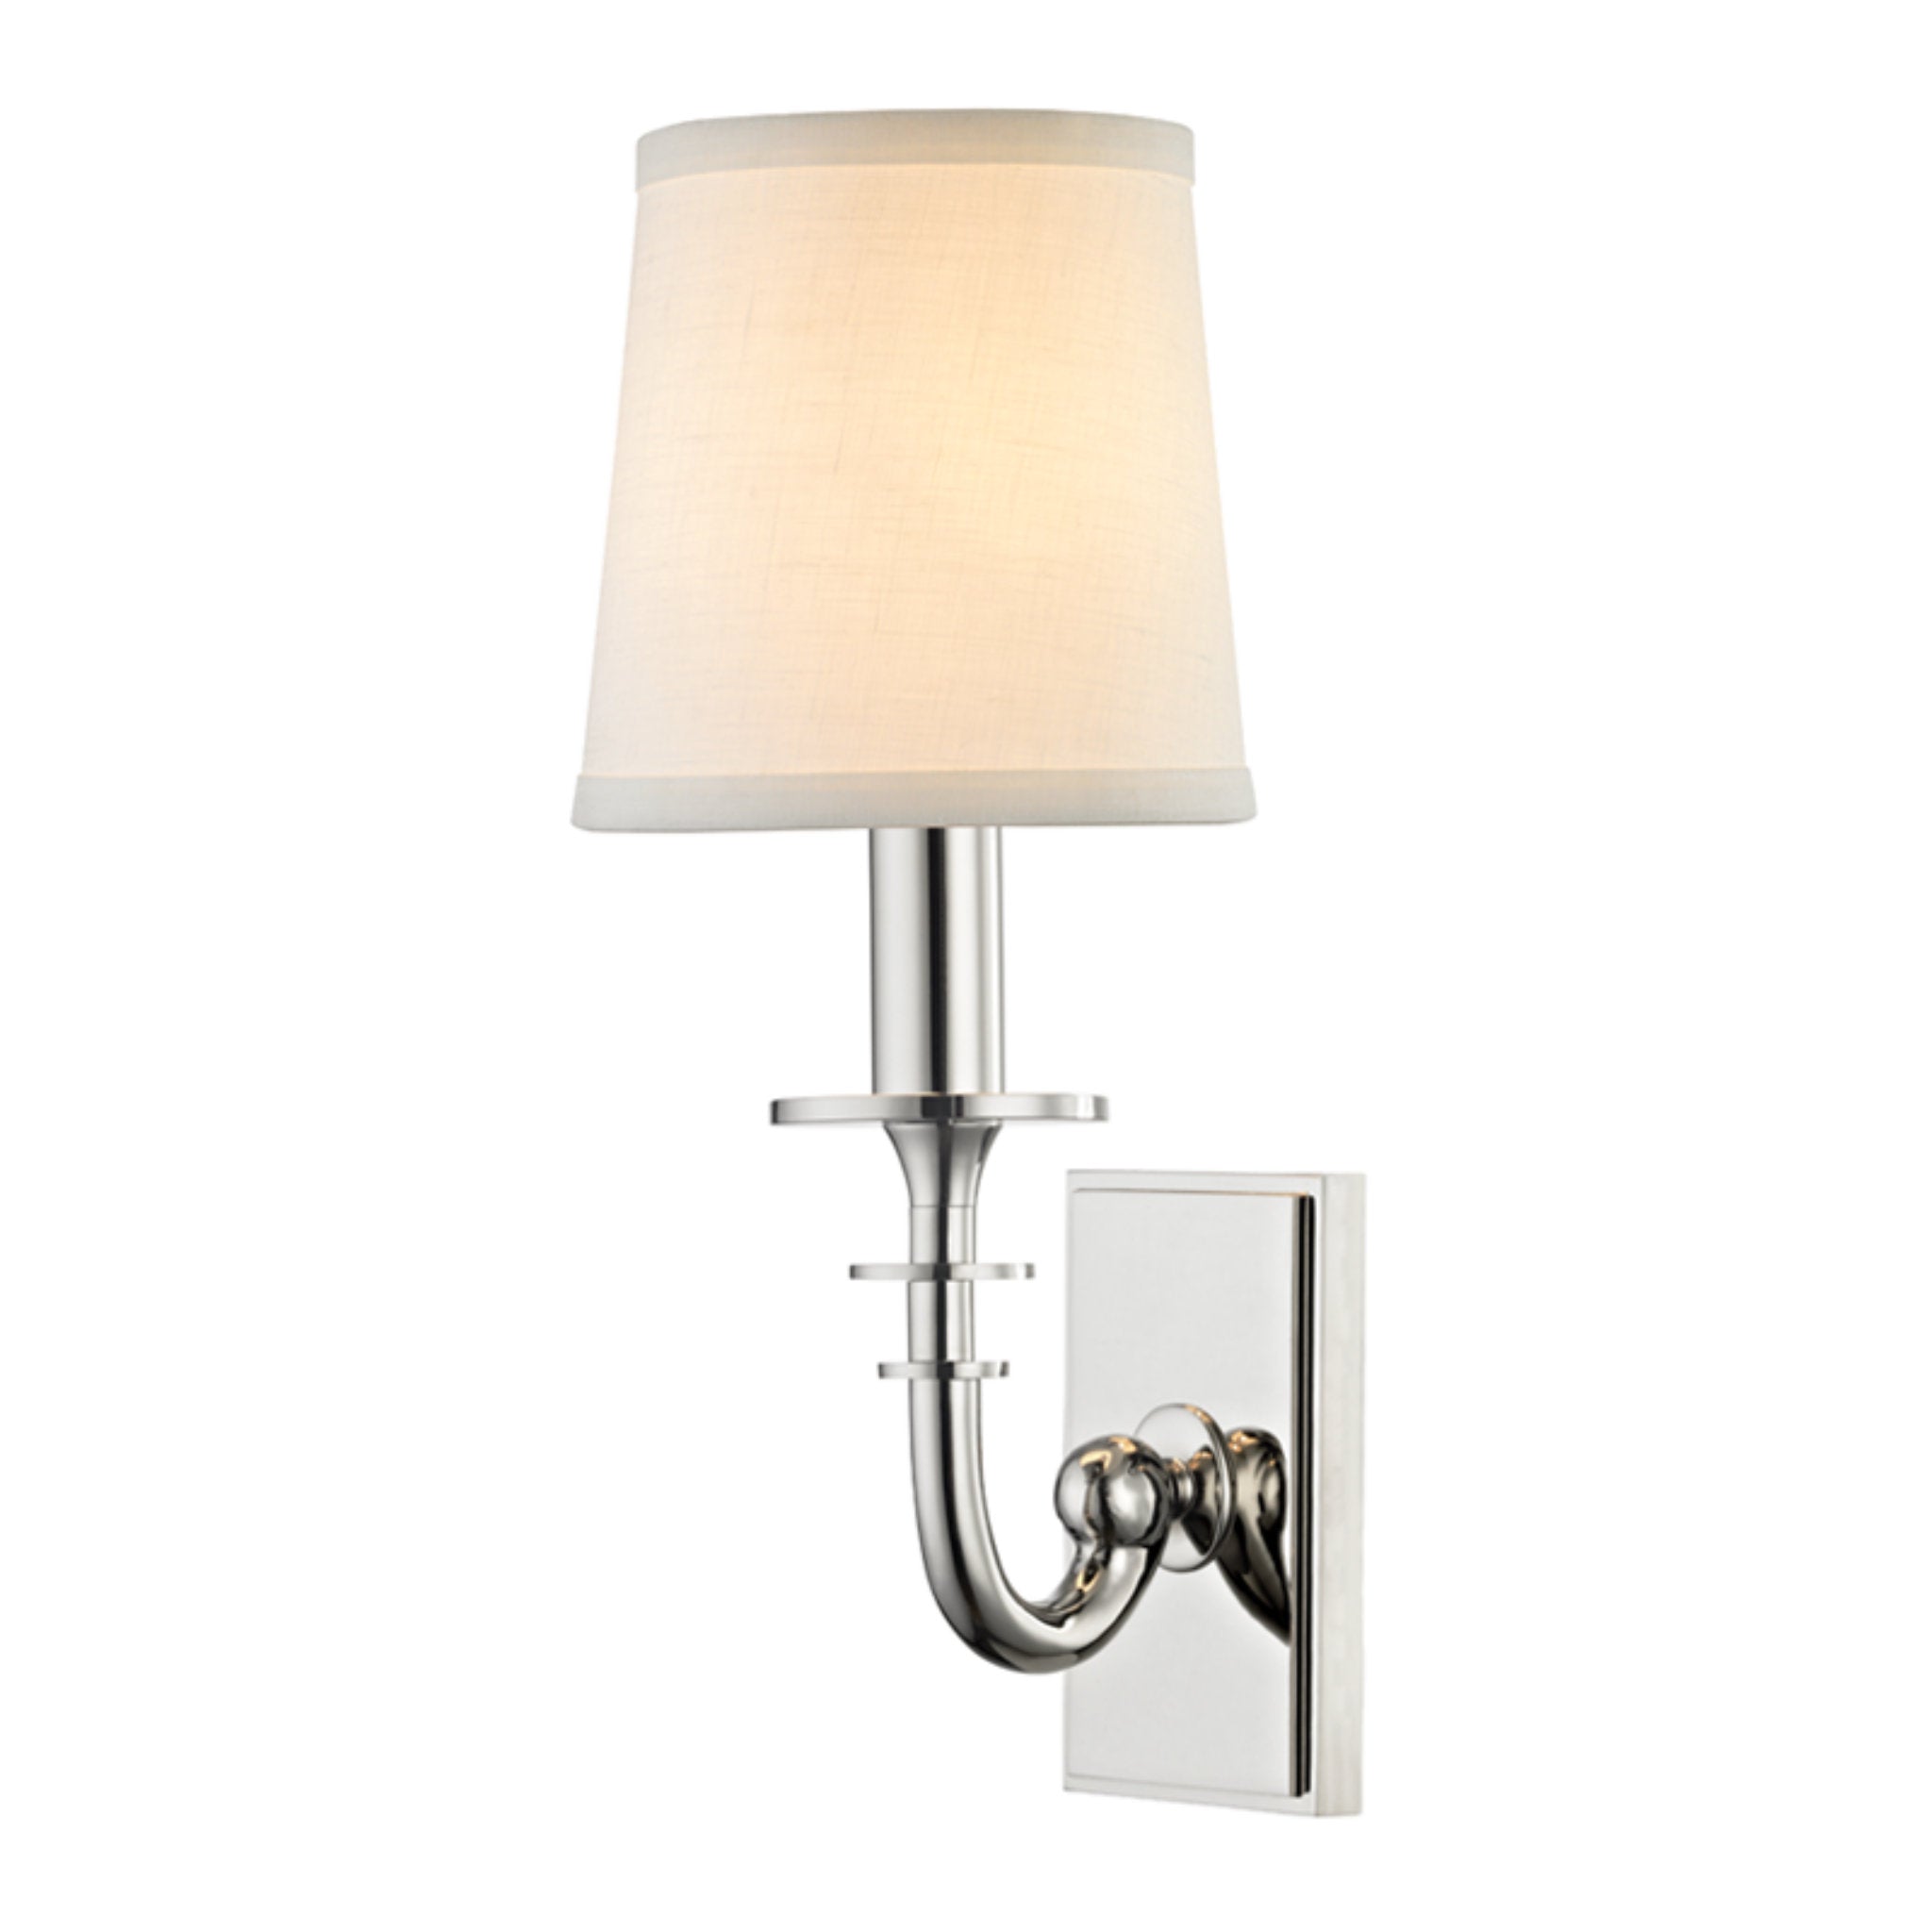 Carroll 1 Light Wall Sconce in Polished Nickel